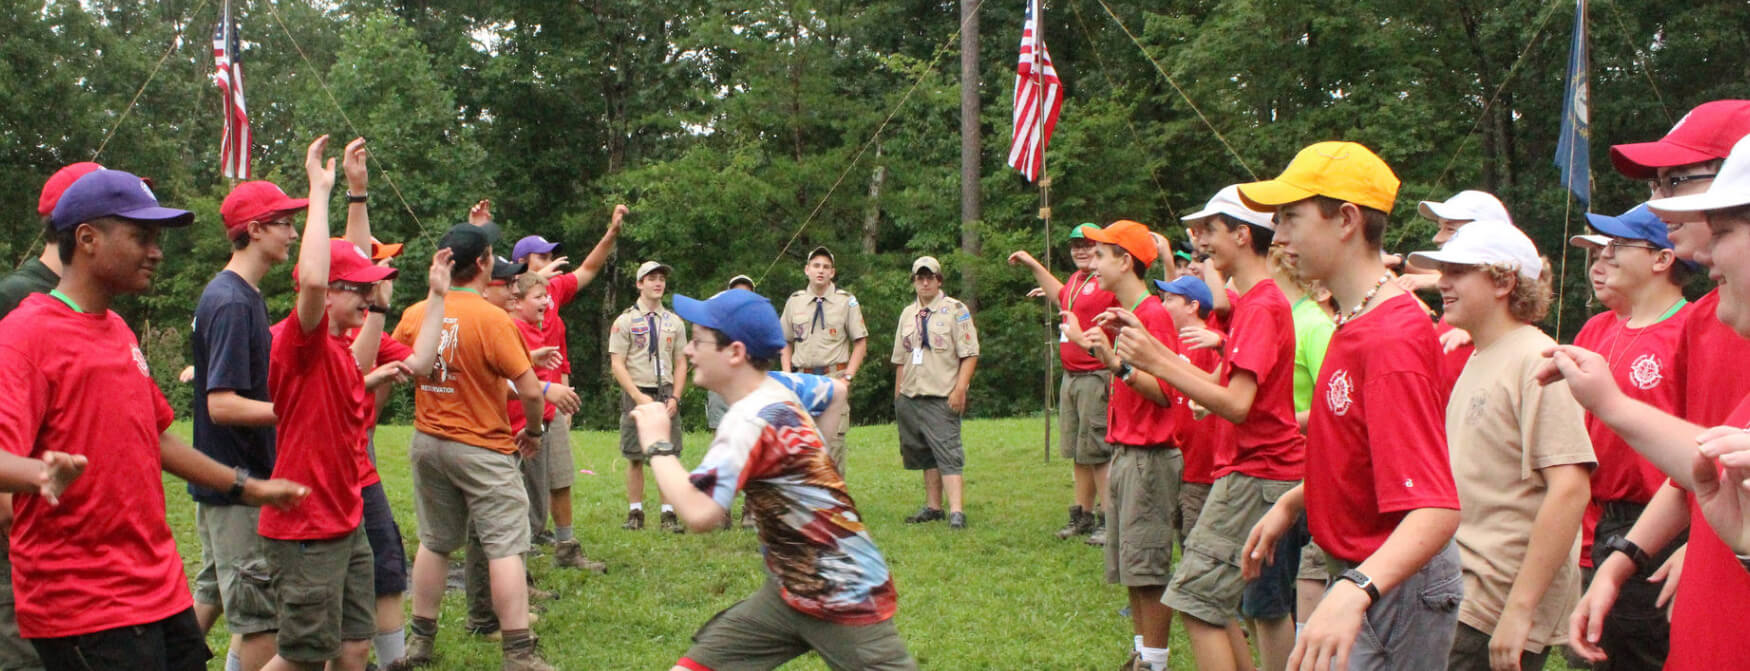 Scouts playing a game at NYLT